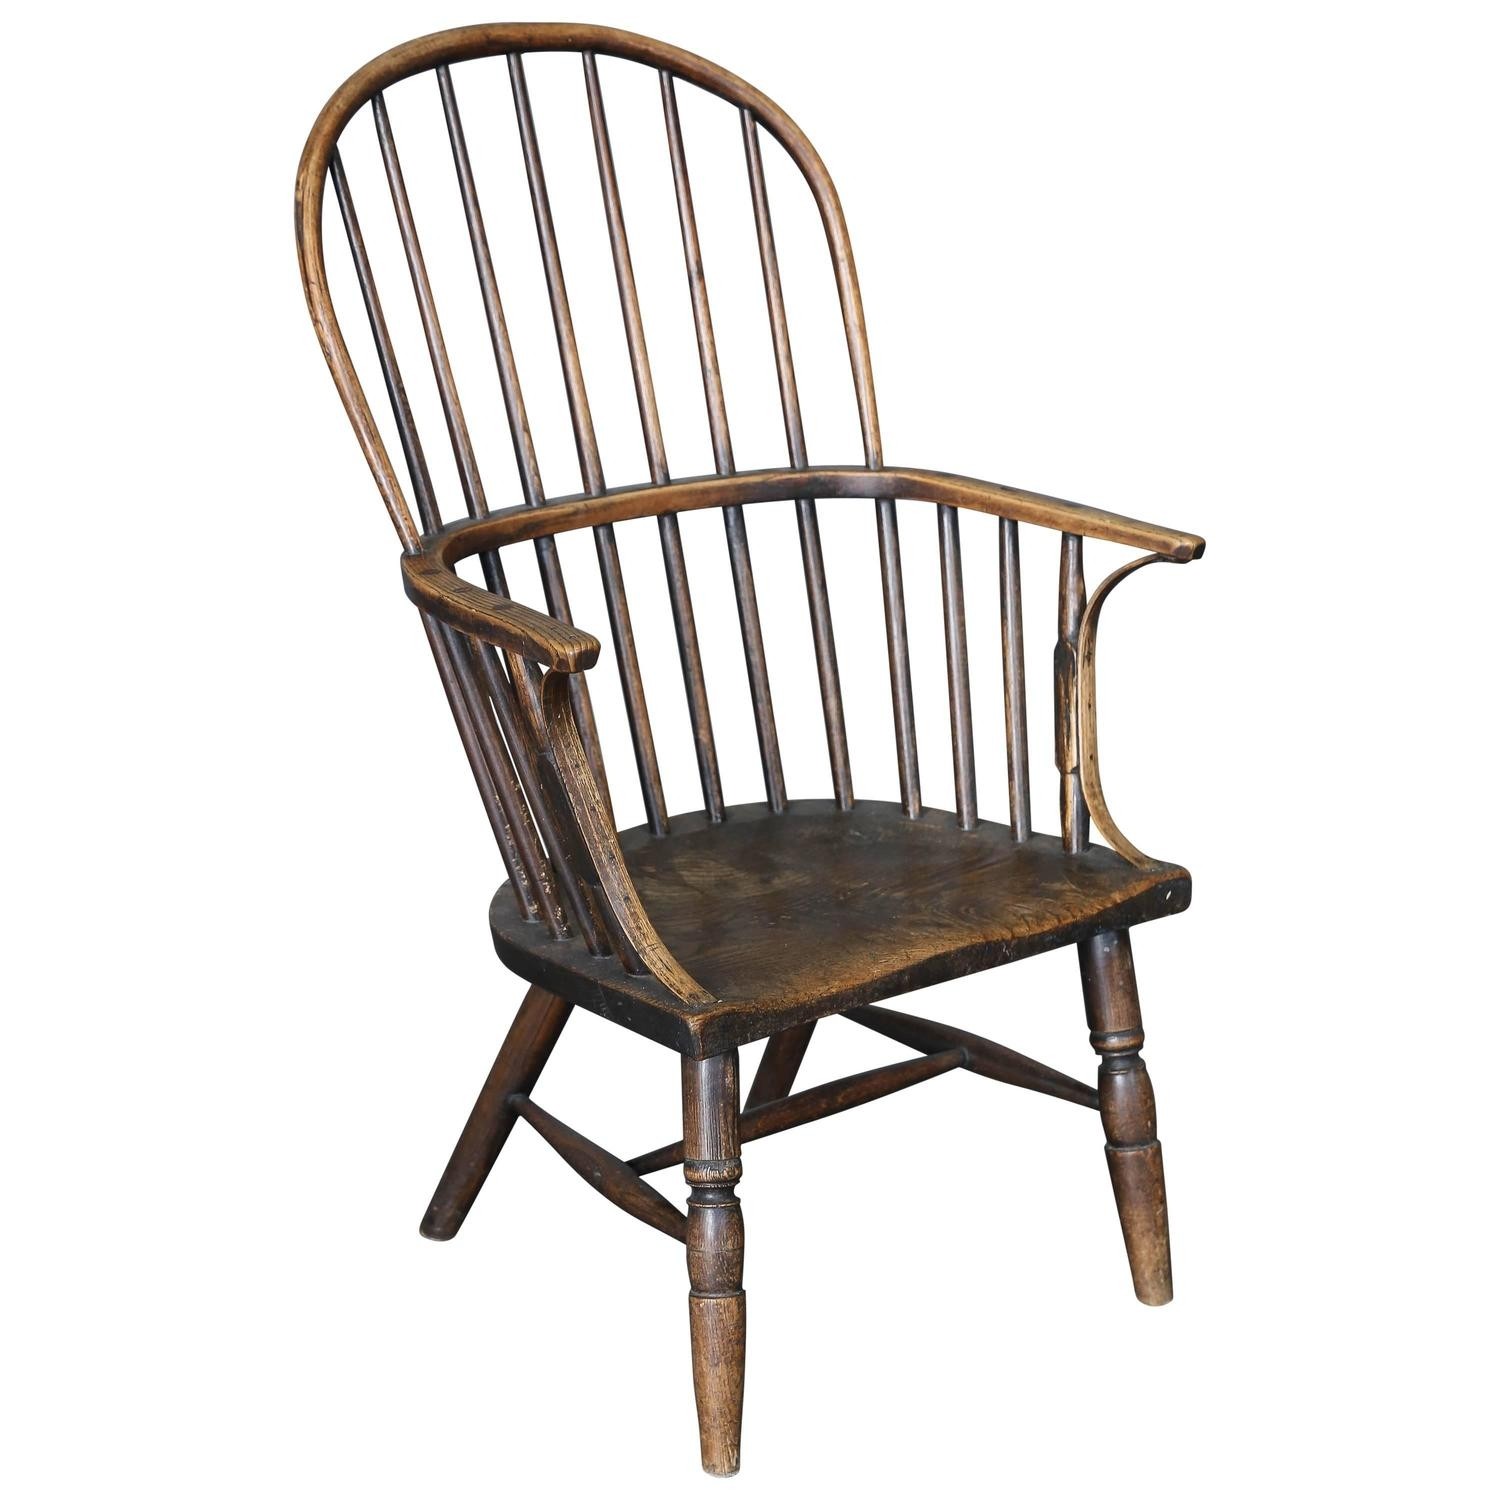 Antique 18th century windsor stick chair for sale at 1stdibs